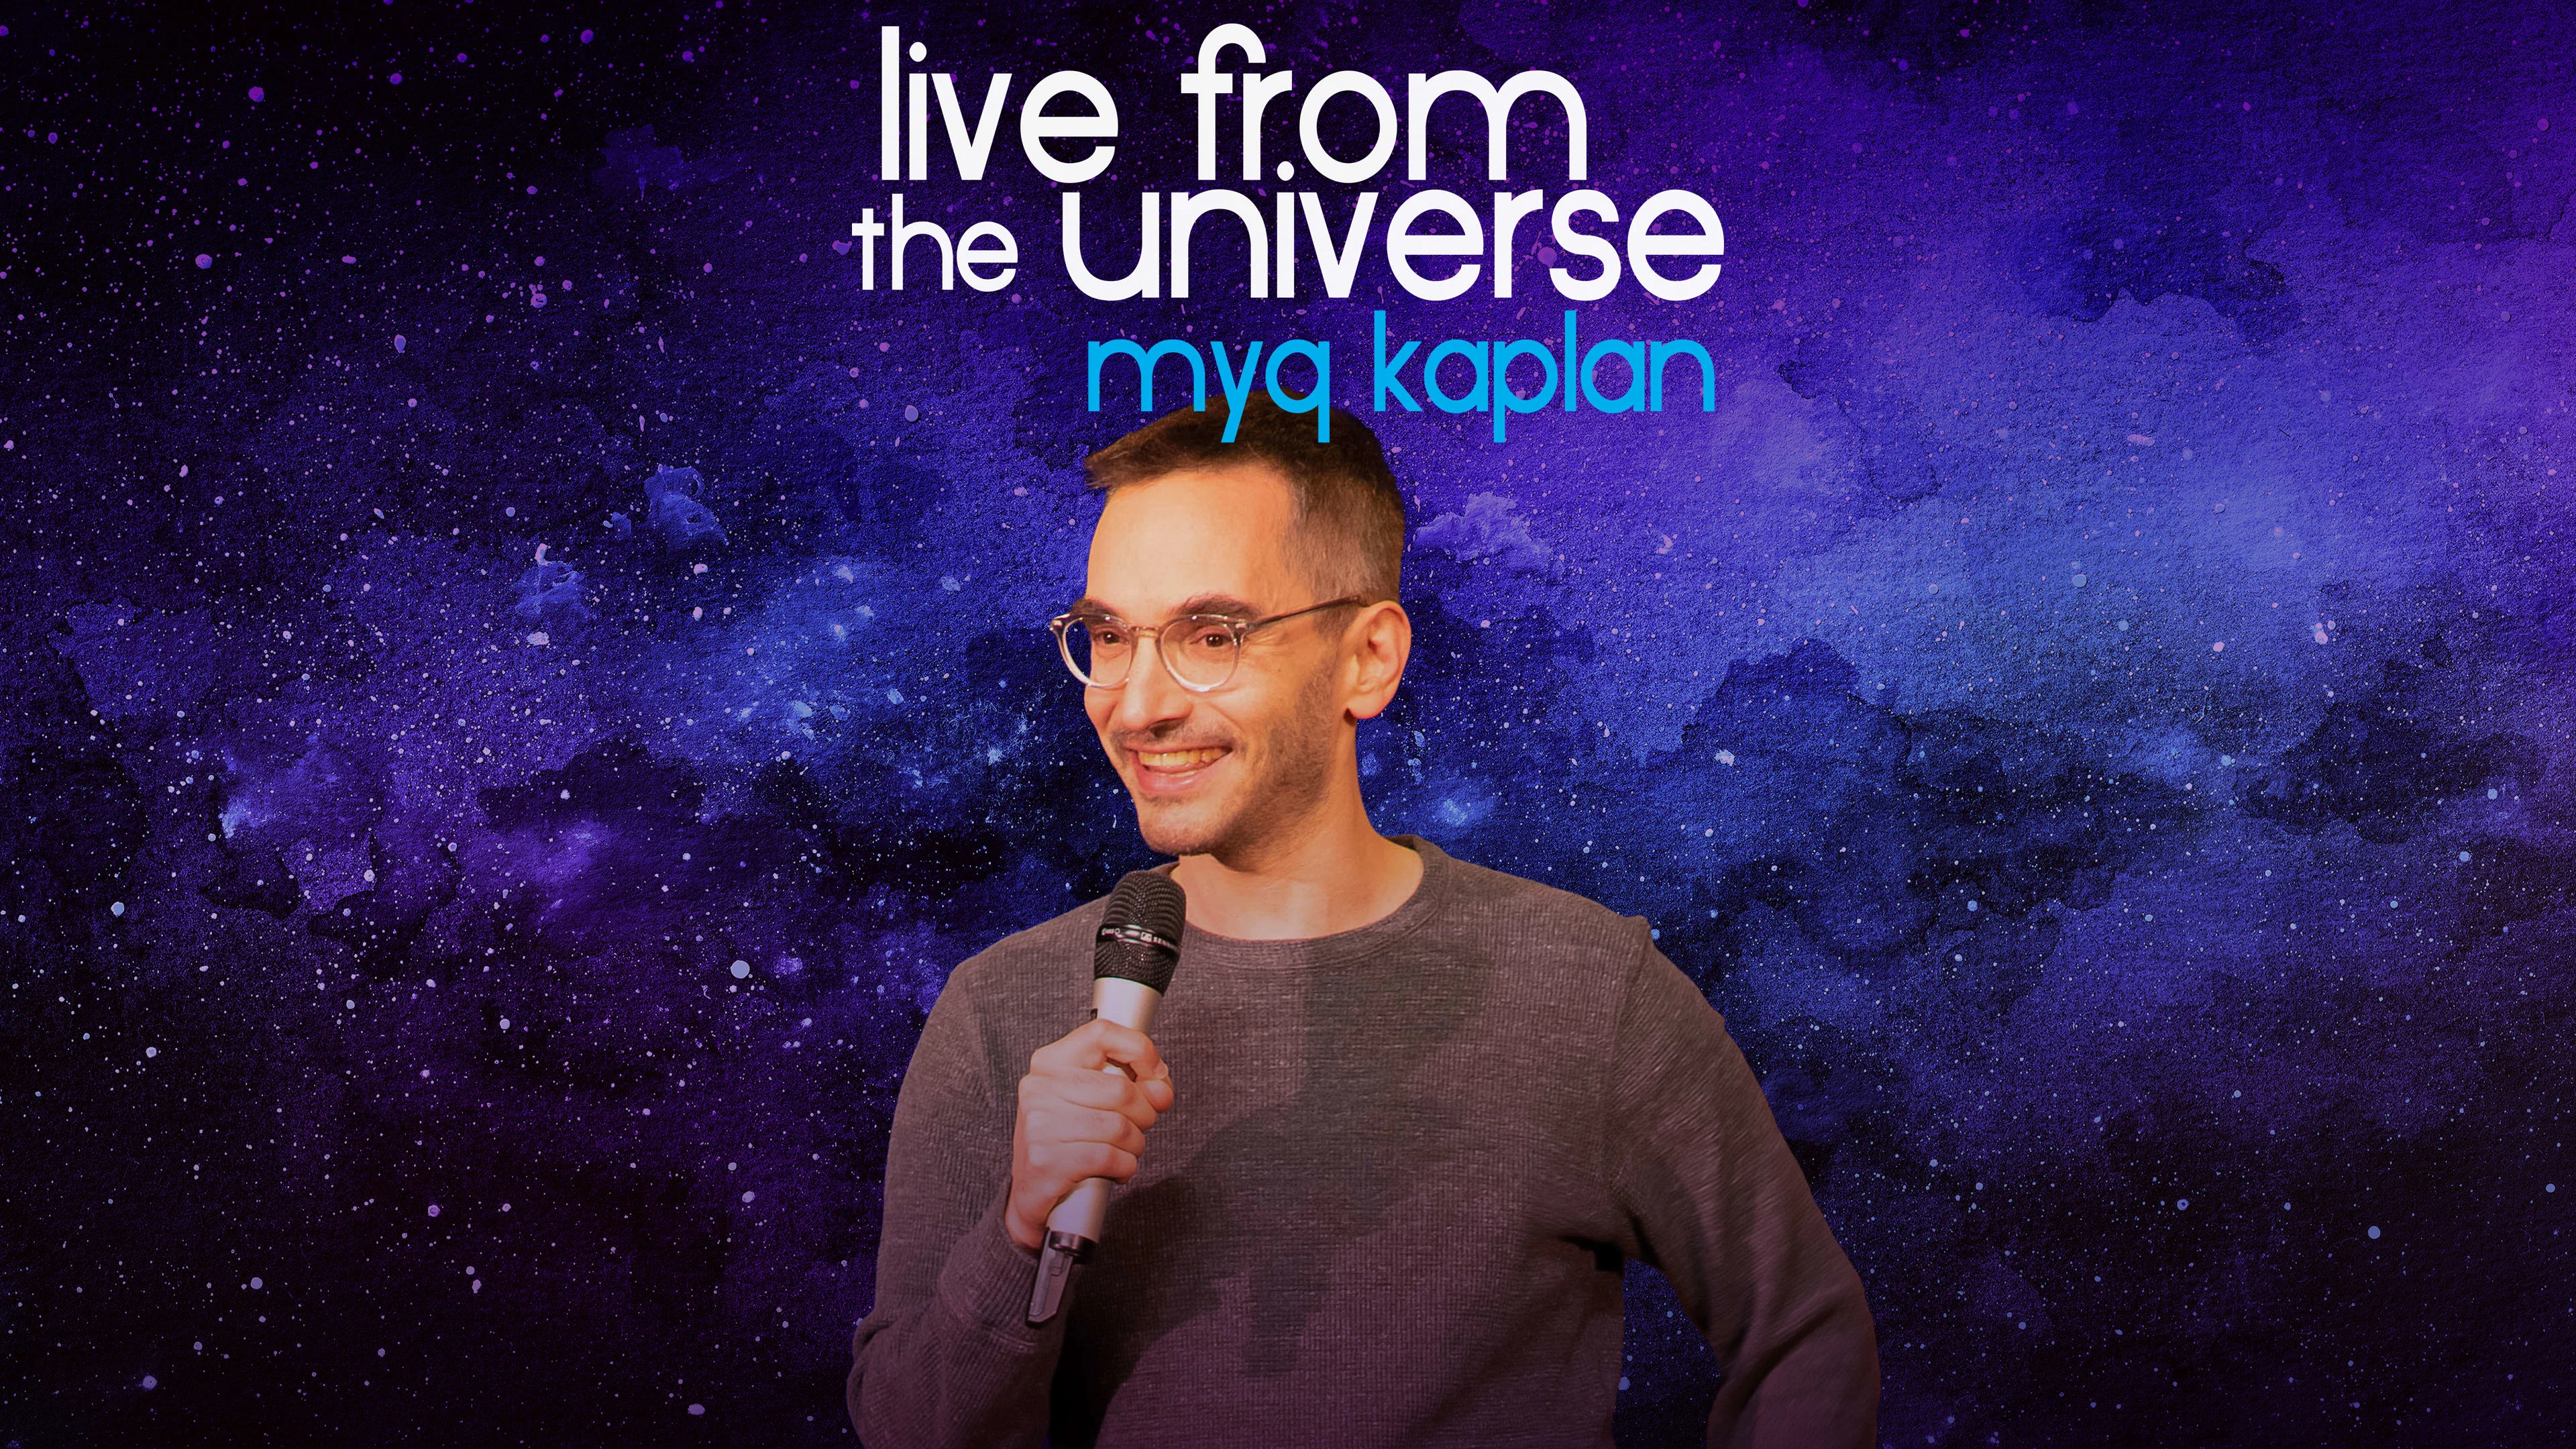 Myq Kaplan - Live From the Universe